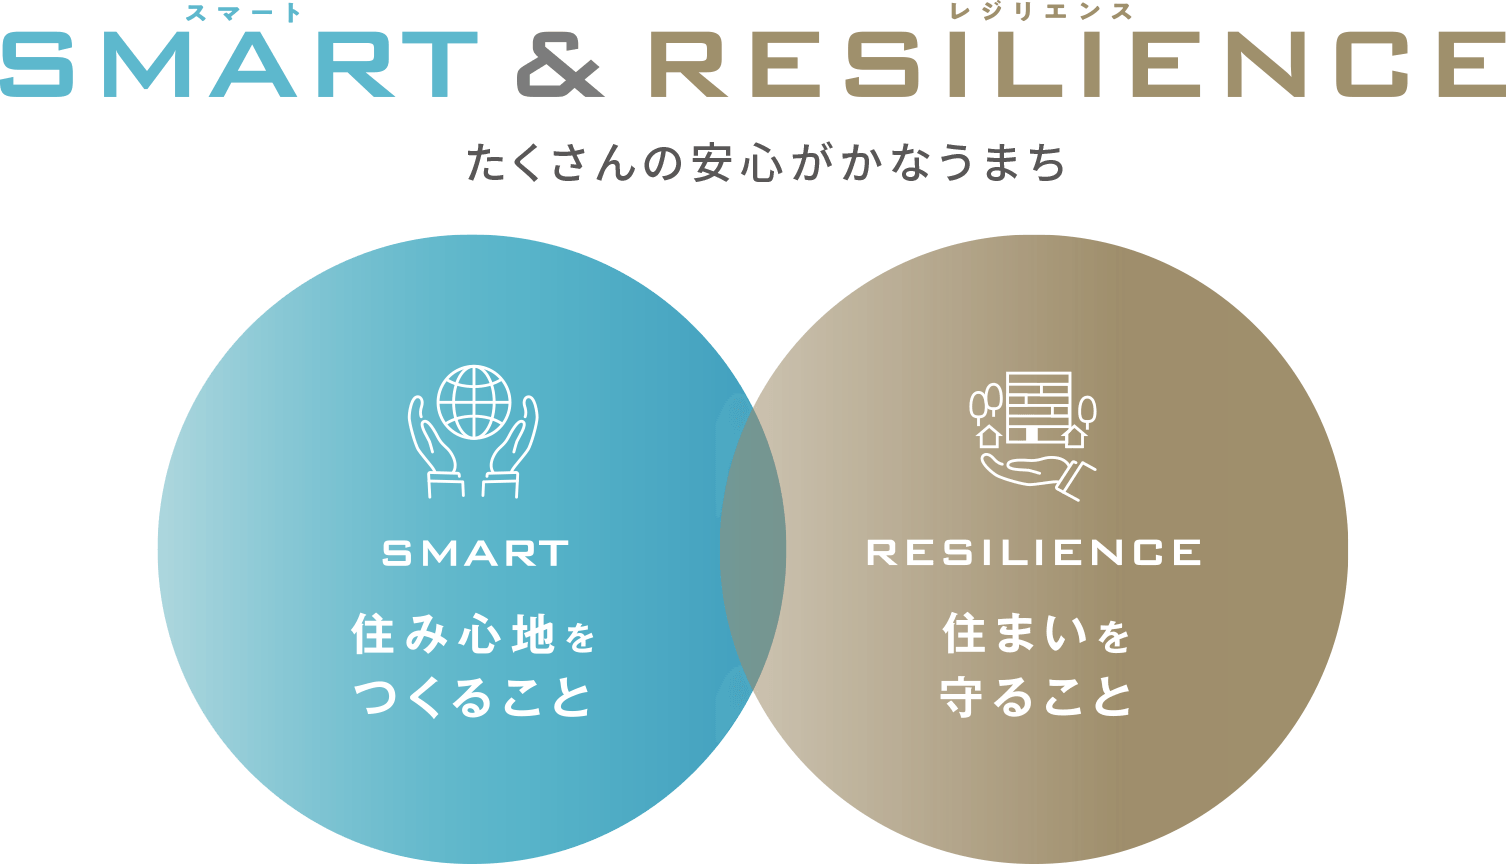 SMART＆RESILIENCE